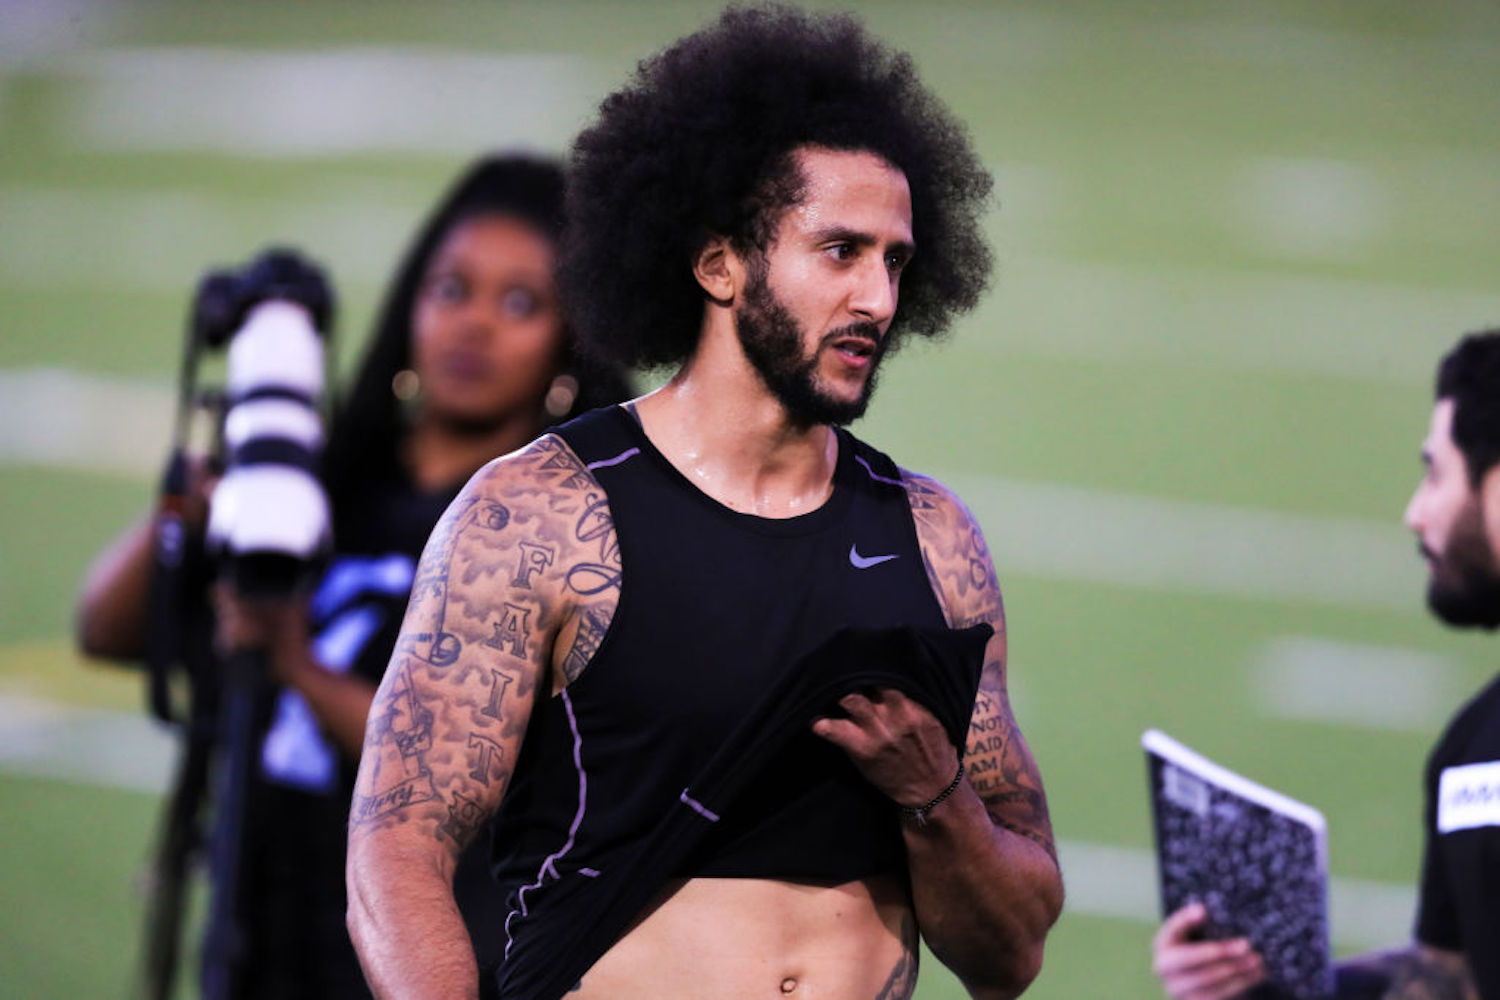 The 2020 NFL season is just days away, but Colin Kaepernick still hasn't received any real interest from a possible suitor.